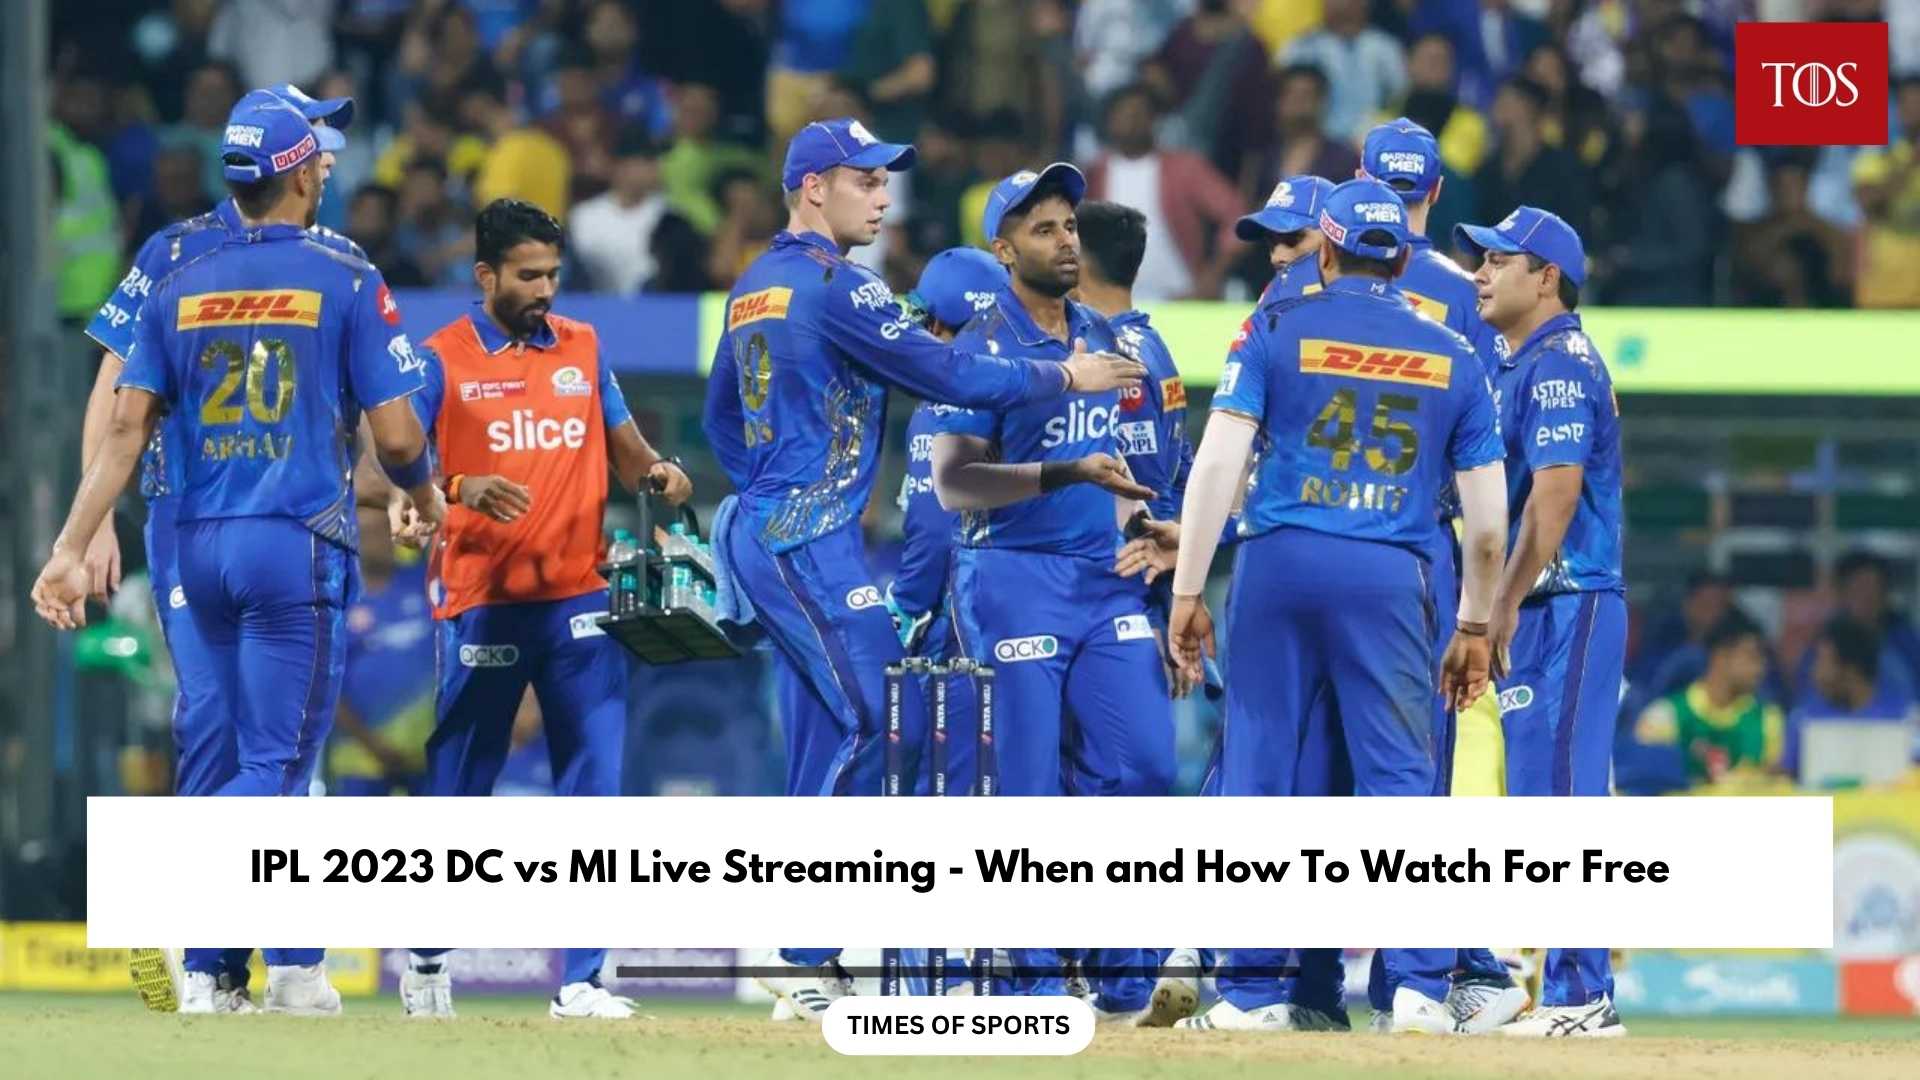 IPL 2023 DC vs MI Live Streaming When and How To Watch For Free